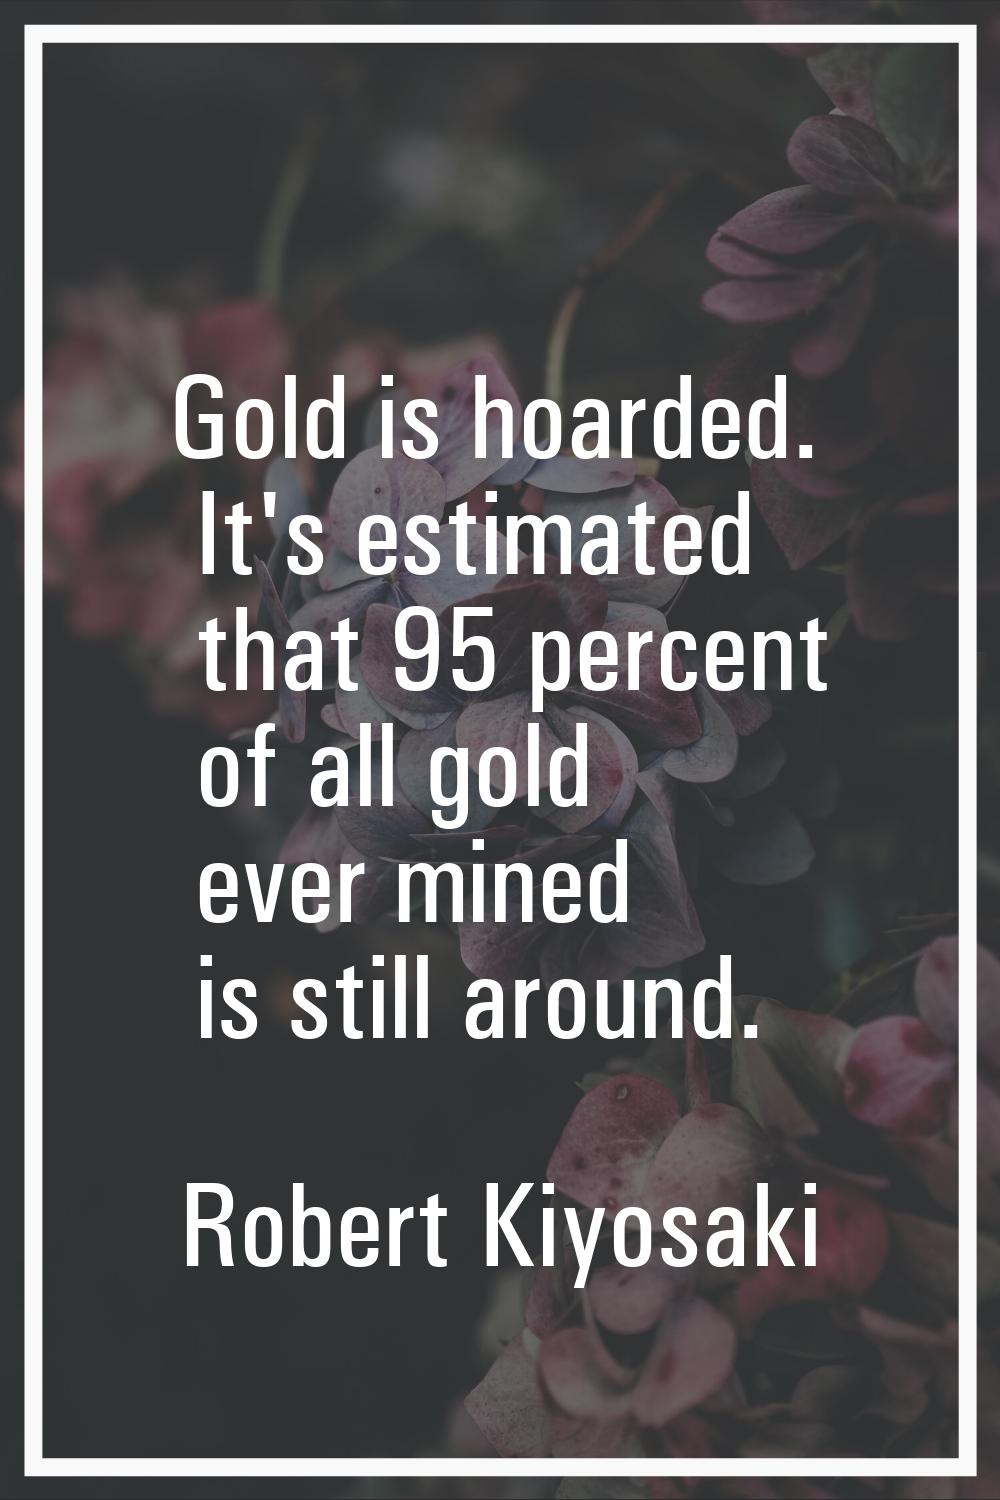 Gold is hoarded. It's estimated that 95 percent of all gold ever mined is still around.